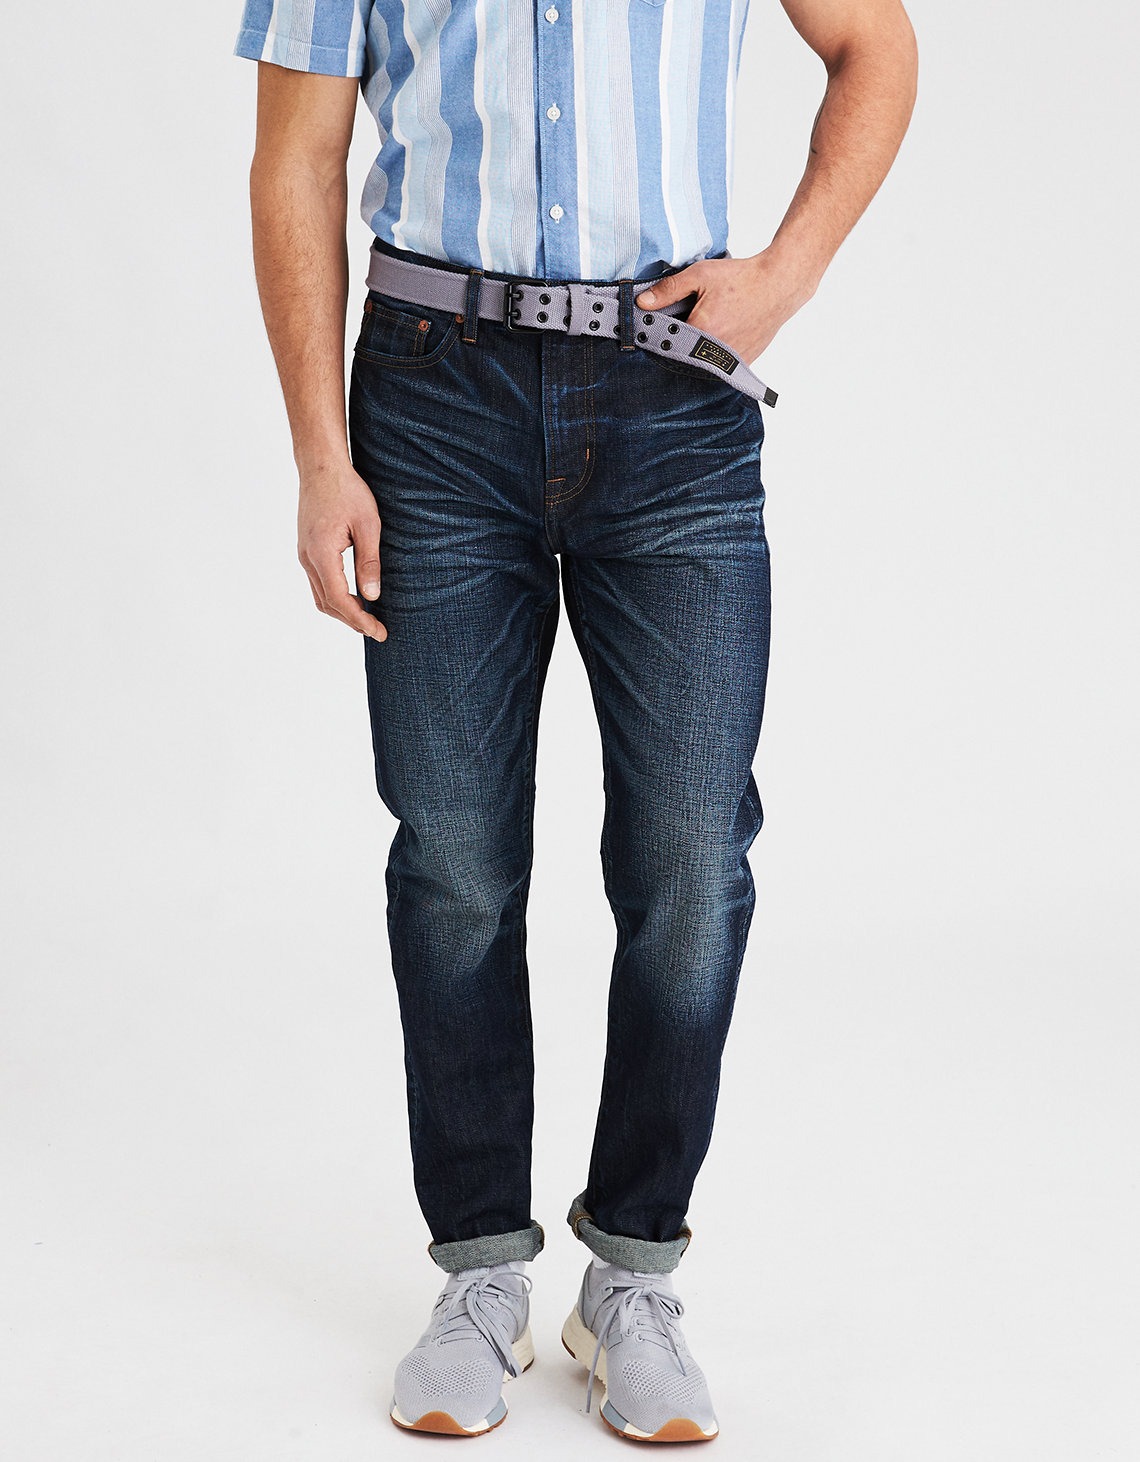 dad jeans american eagle